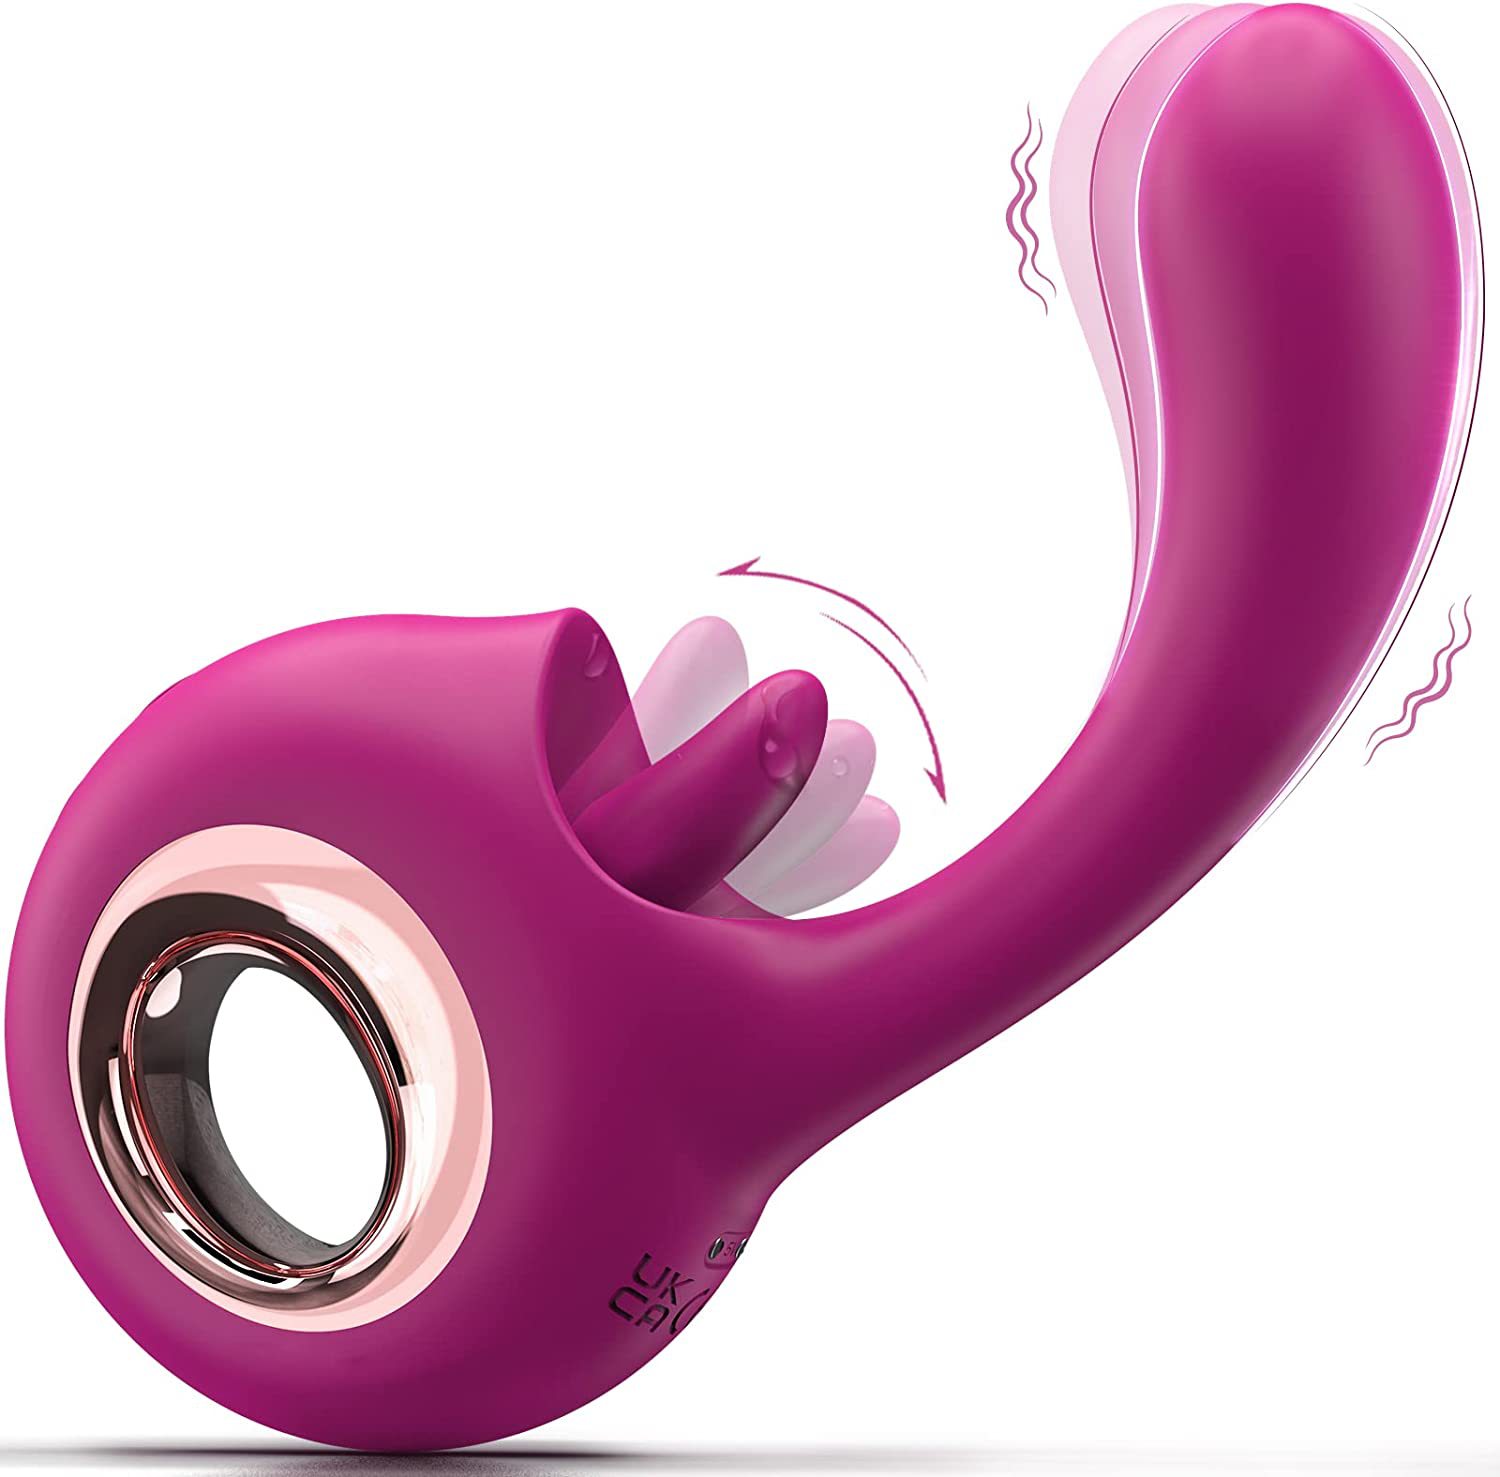 9 Modes Rose Tongue & Dildo Vibrator - Rechargeable, Waterproof Adult Sex Toy for Women and Couples